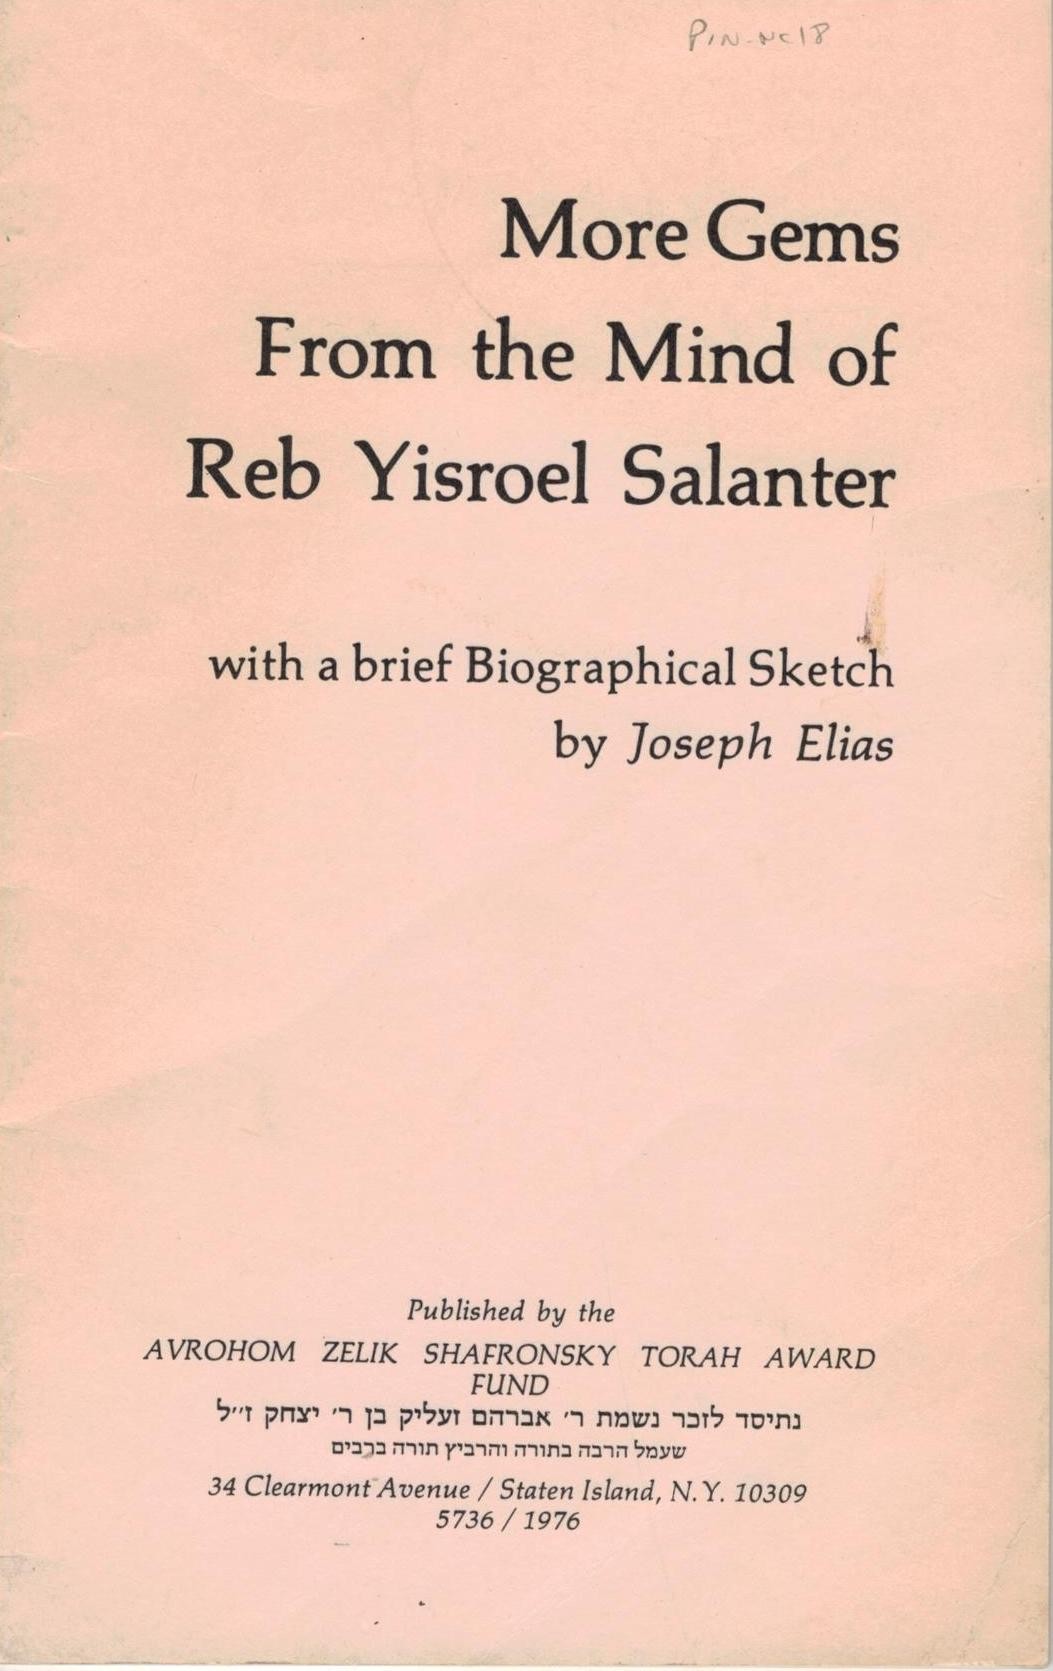 More Gems From the Mind of Reb Yisroel Salanter